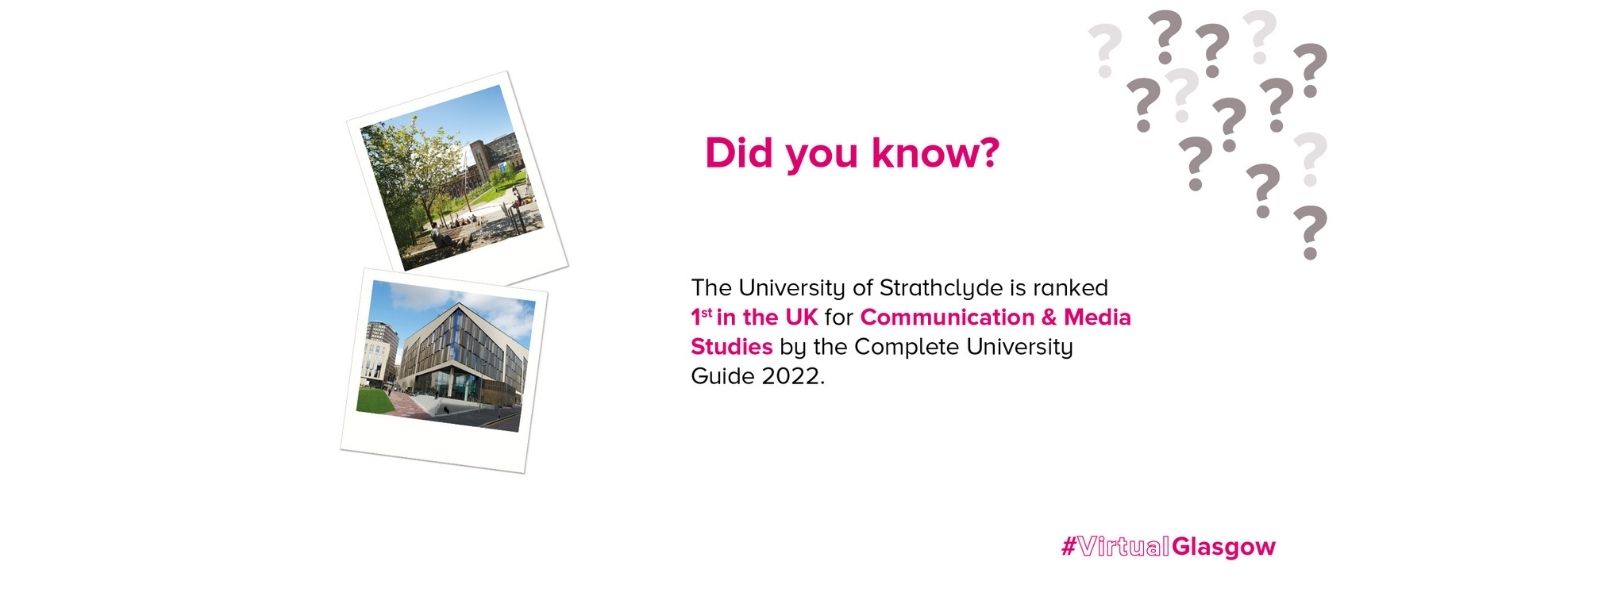 A slide from Glasgow Convention Bureau's Hybrid Toolkit displaying information on University of Strathclyde's rankings